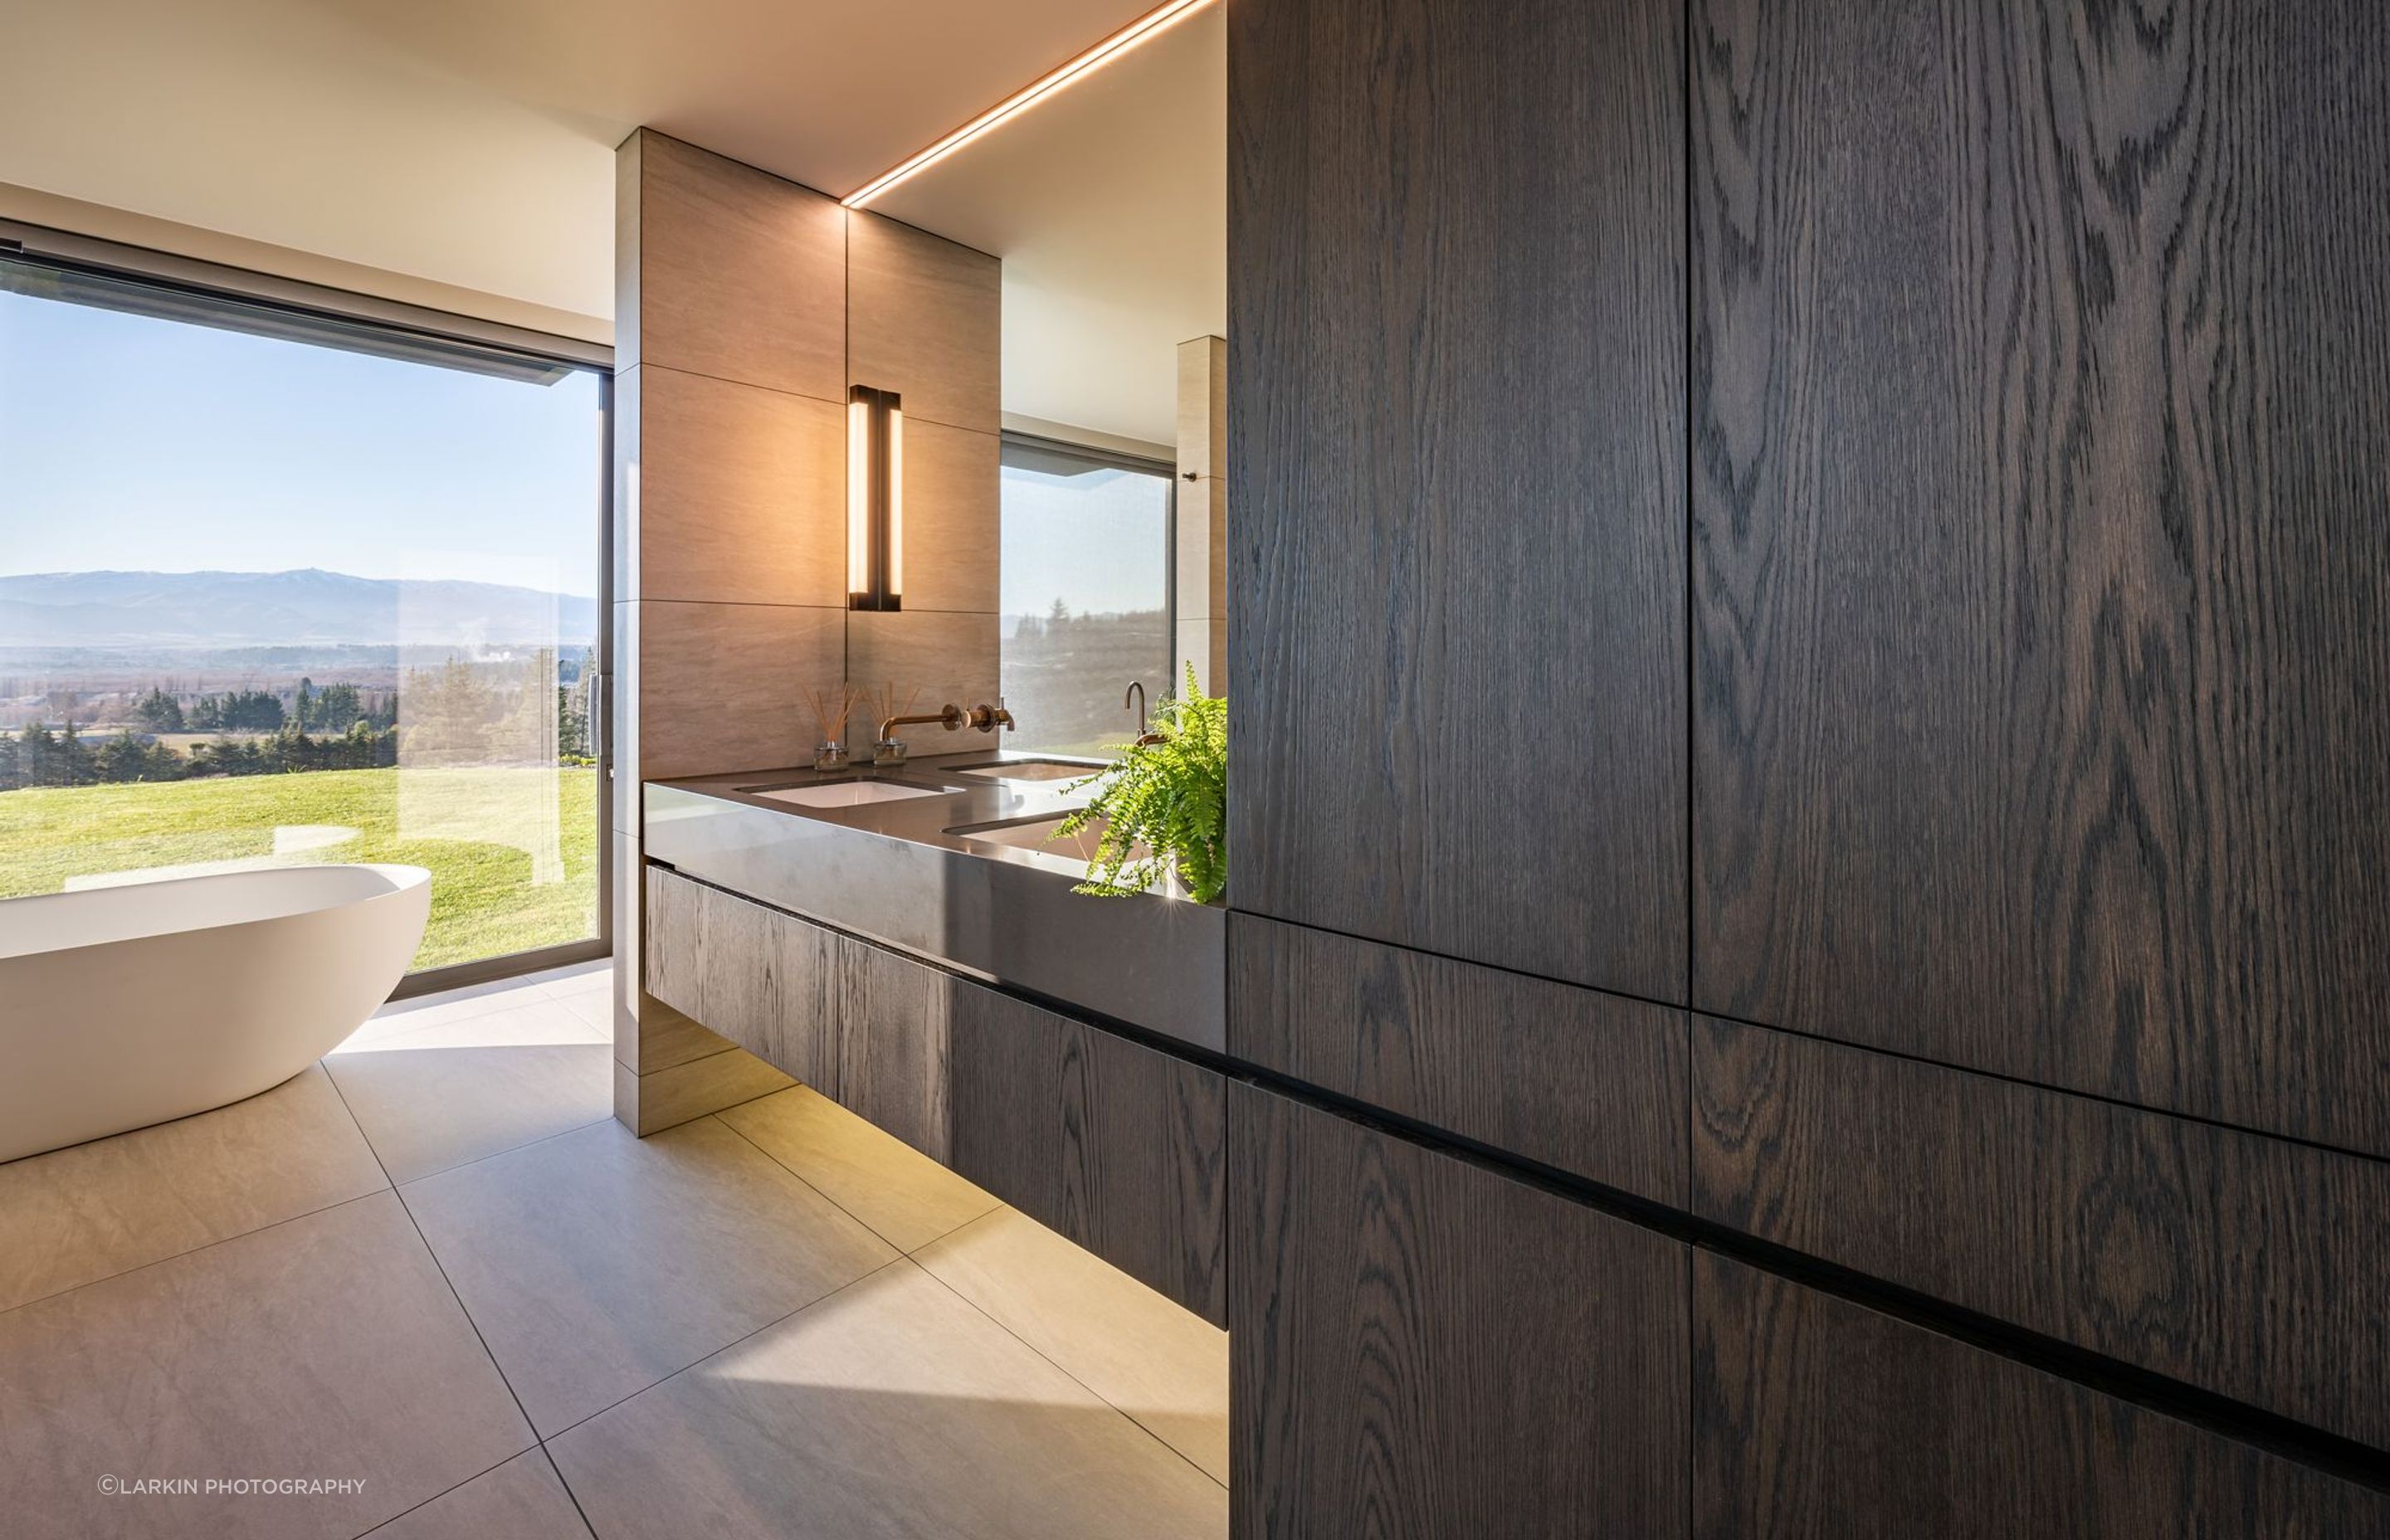 Dark oak laminate cabinetry and double sinks bring a dramatic yet earthy element to the master en suite.